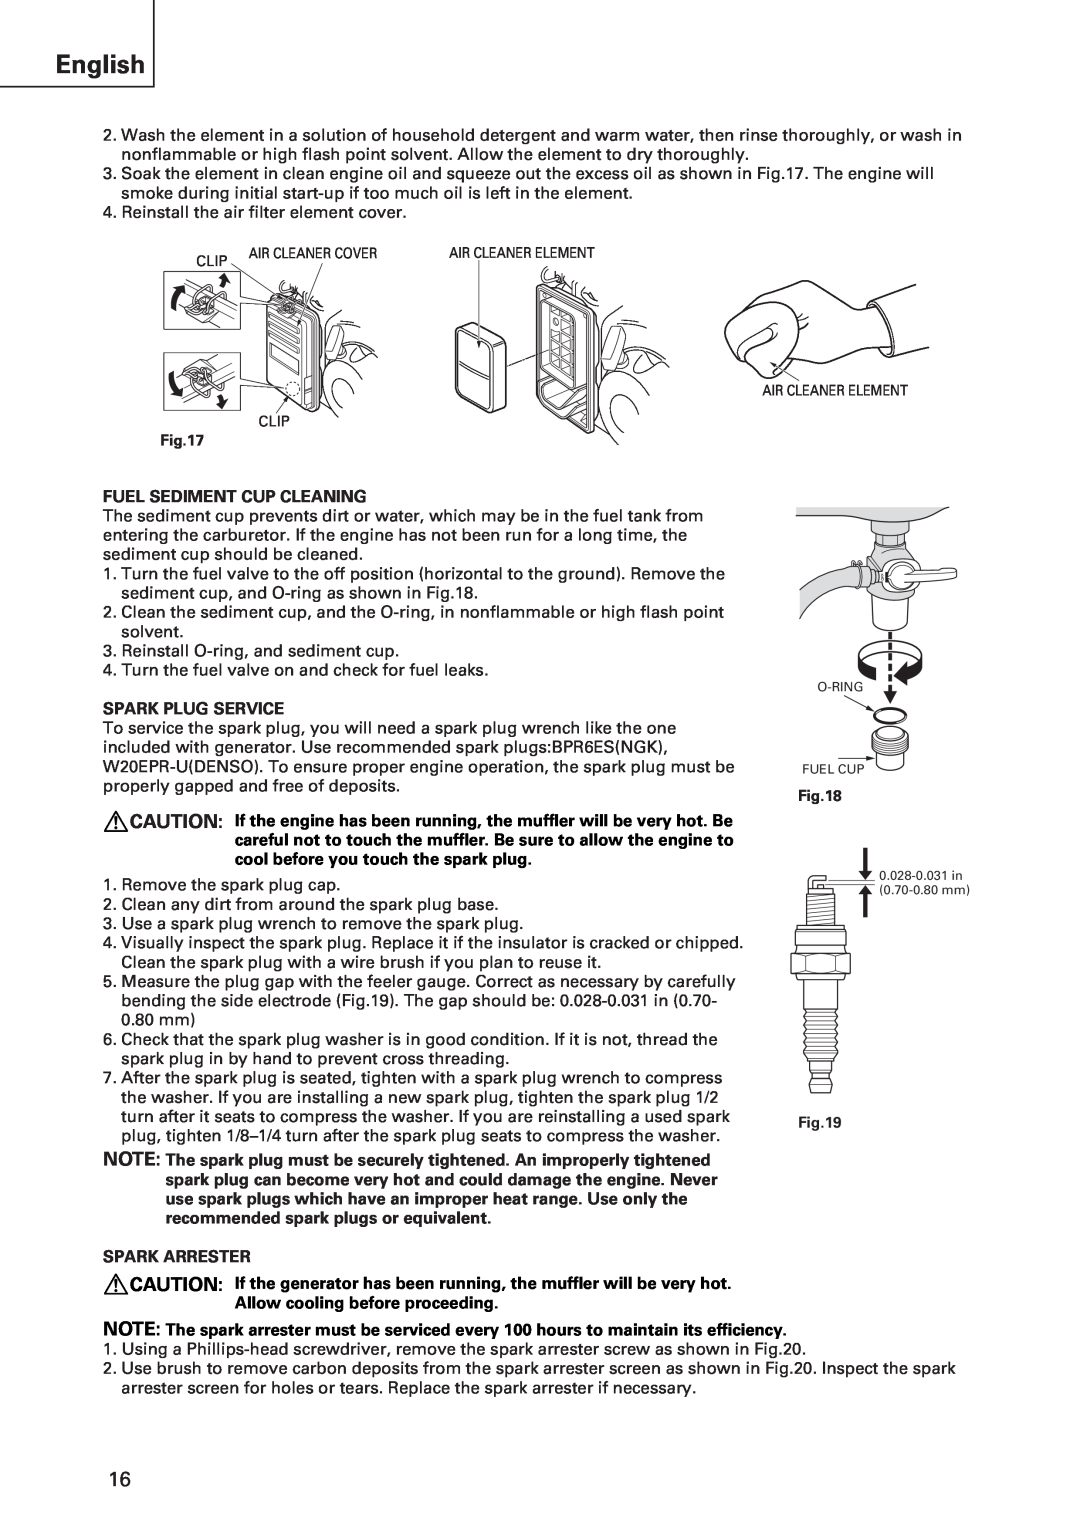 Hitachi E43 instruction manual English, Fuel Sediment Cup Cleaning 